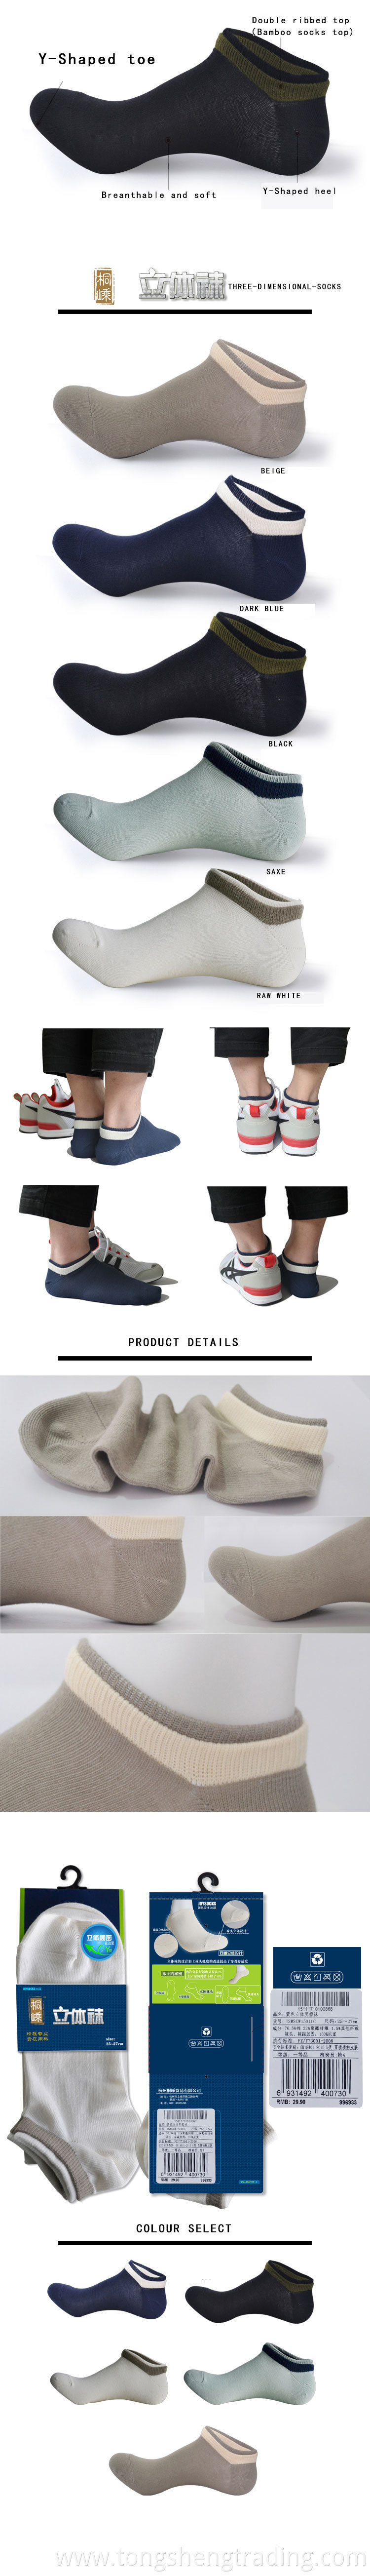 Three Dimensional Socks With Double Socks Mouth Top Tsmscw15011c Product Details